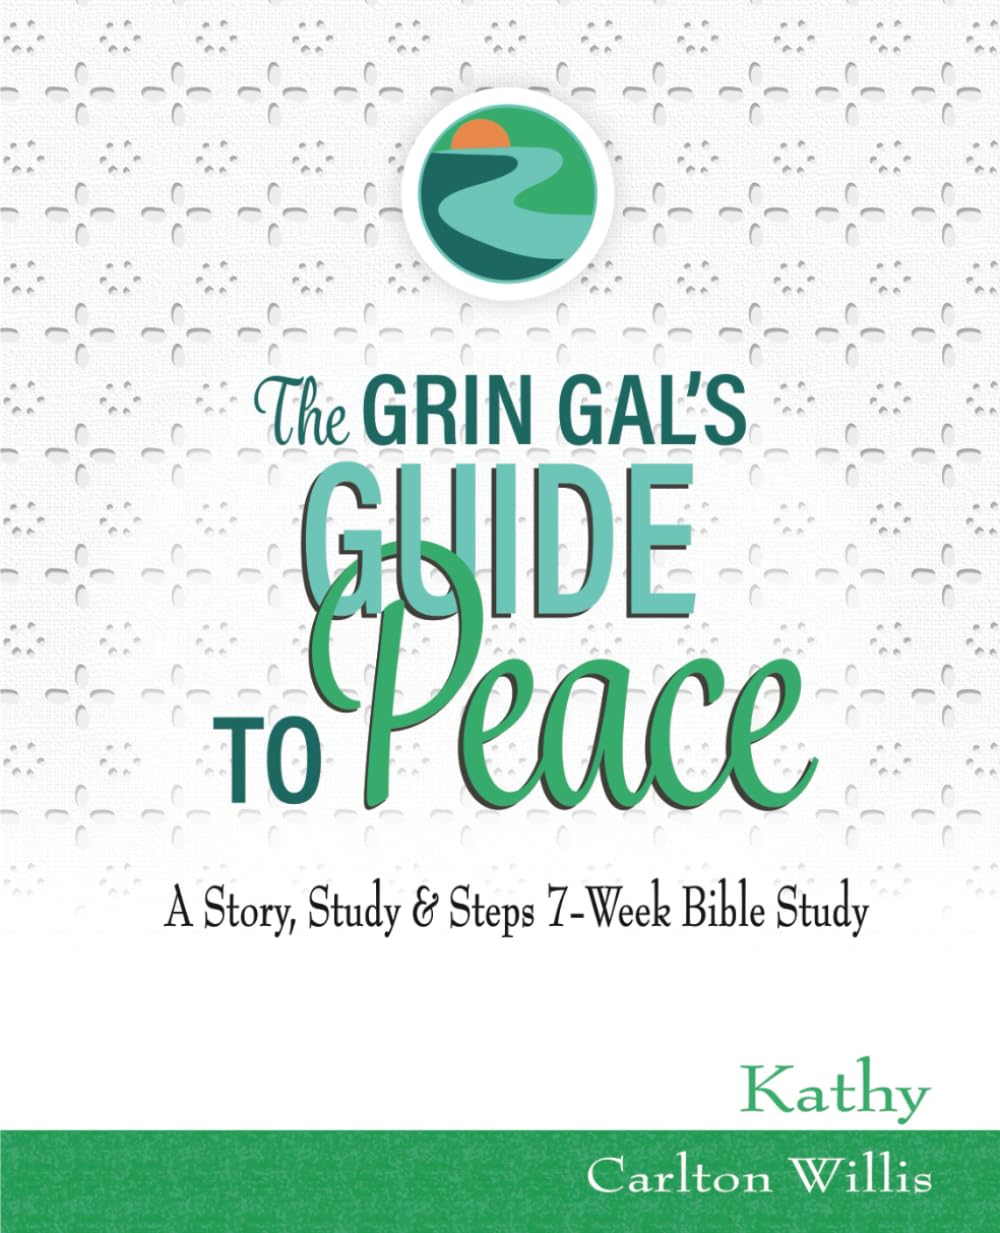 The Grin Gal’s Guide to Peace: A Story, Study & Steps 7-Week Bible Study